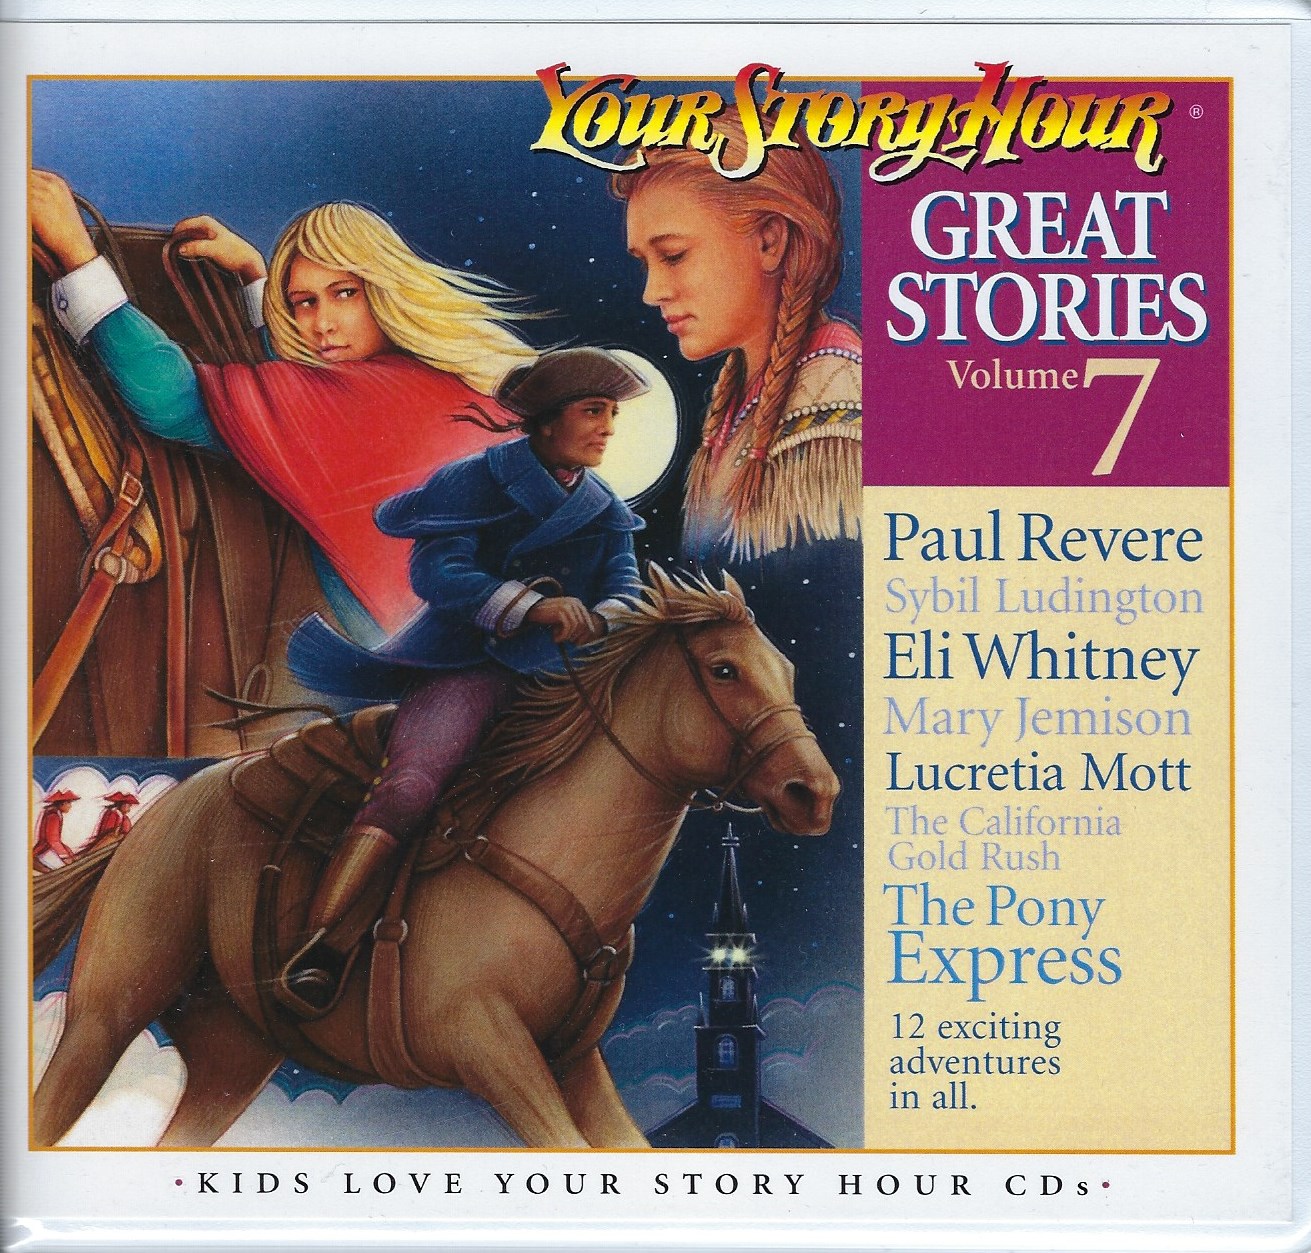 GREAT STORIES VOLUME 7 CD ALBUM Your Story Hour